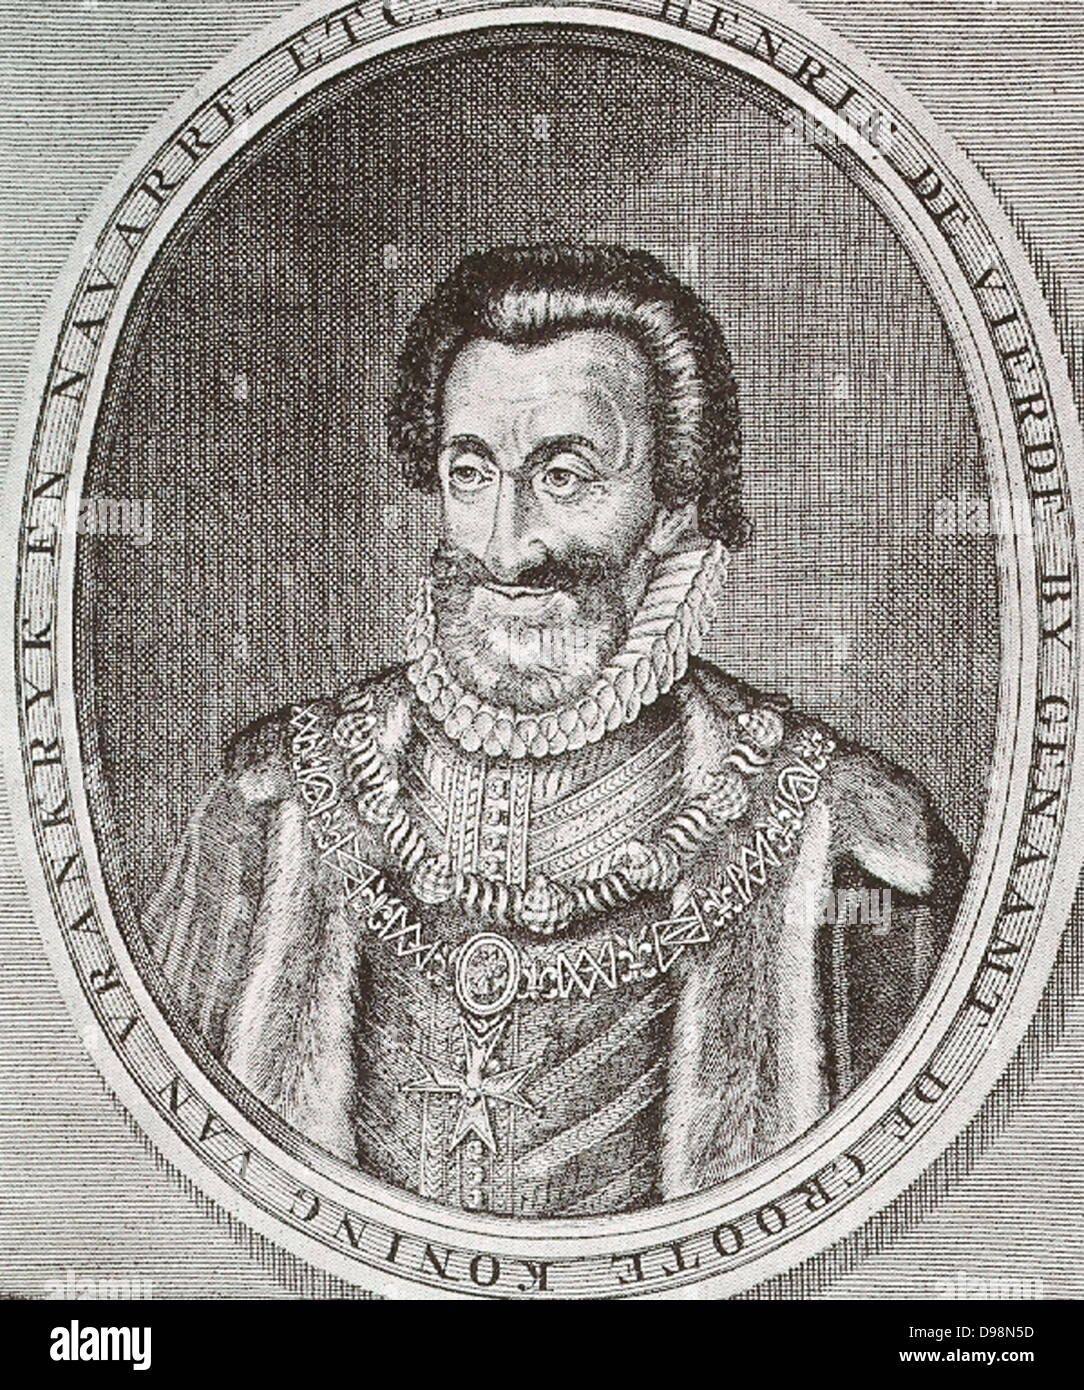 Henry IV of France (1553-1610) was King of France from 1589 to 1589 and King of Navarre from 1572-1610.  He was the first monarch of the Bourbon branch of the Capetian dynasty in France.  As a Huguenot, Henry was involved in the Wars of Religion before ascending the throne in 1589.  Henry VI was one of the most popular French Kings both during and after his reign.  He was assassinated by a fanatical Catholic. Stock Photo